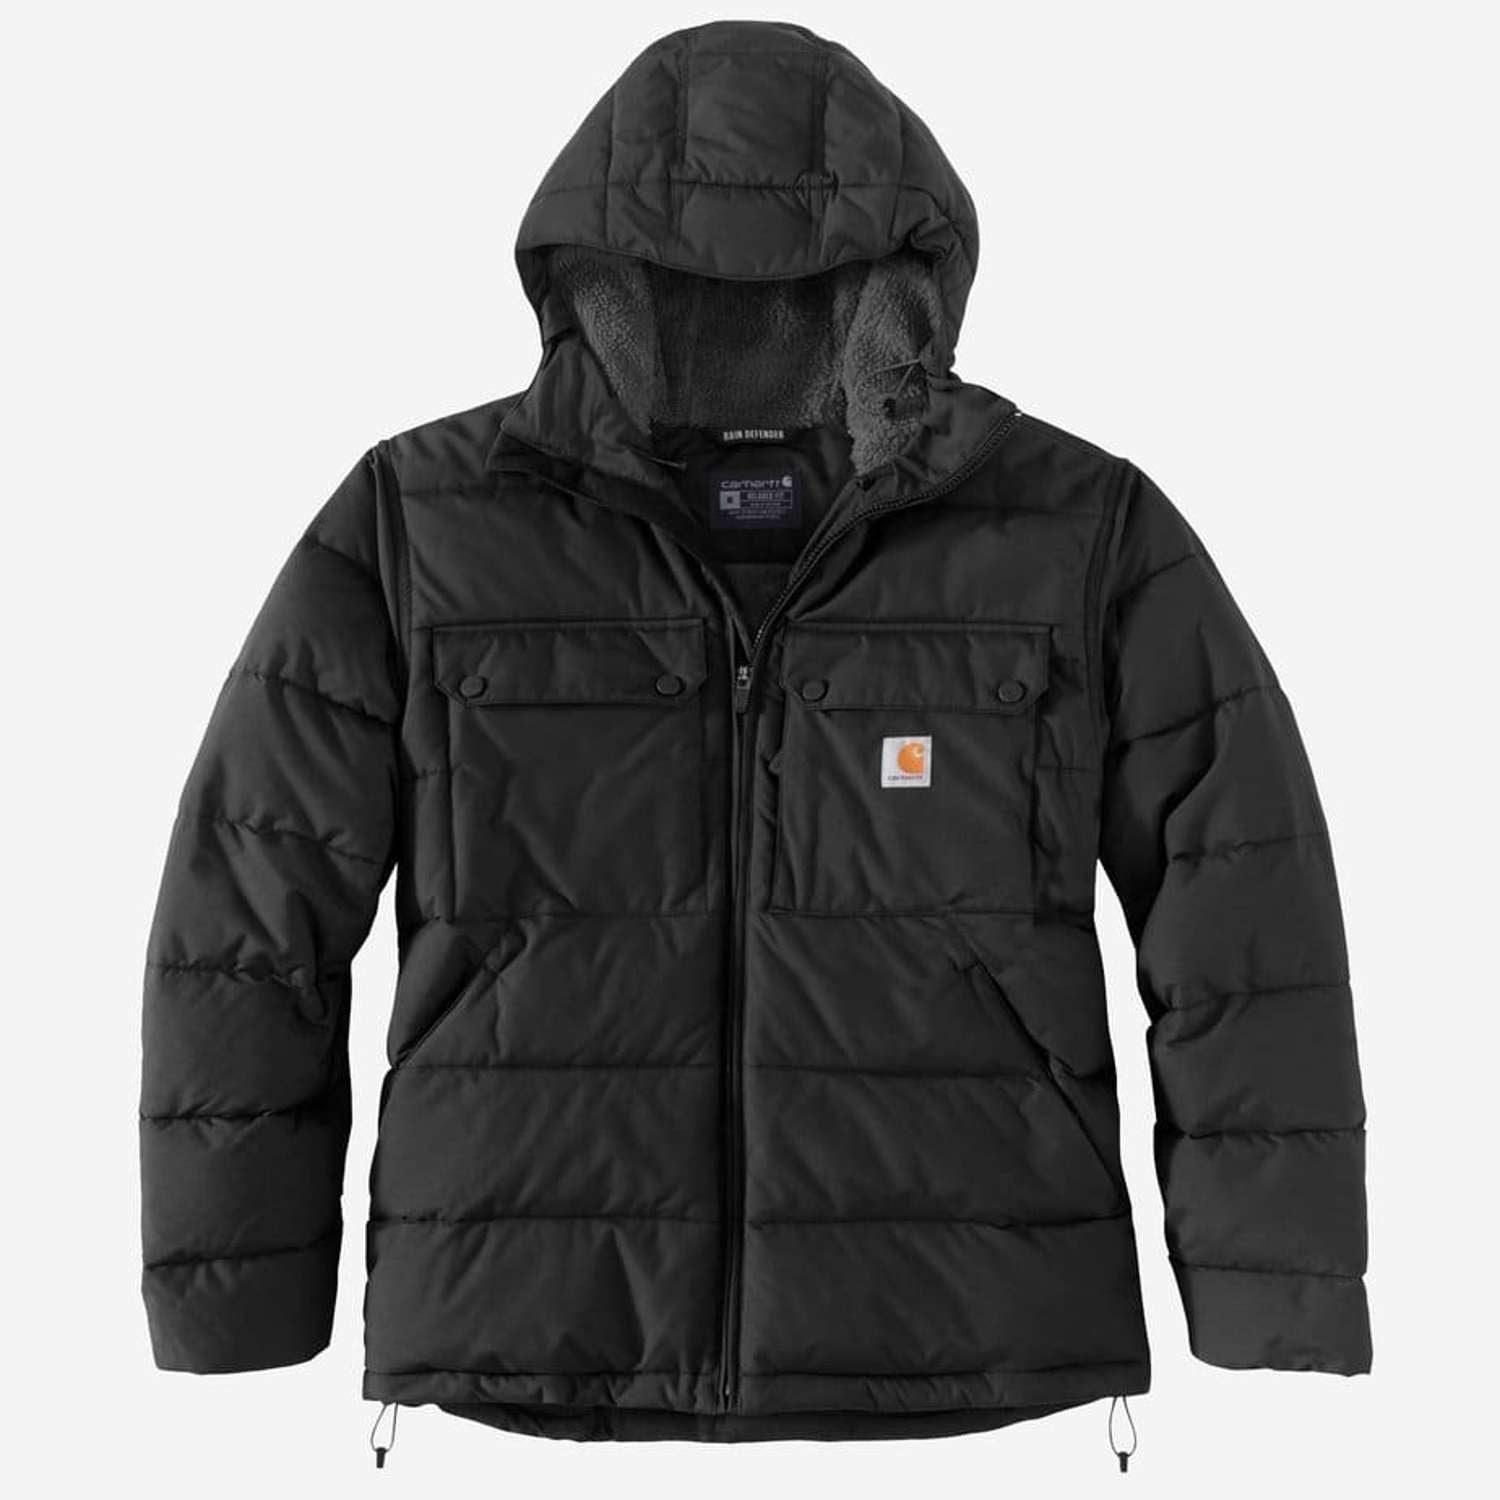 Se CARHARTT Loose Fit Midweight Insulated Jacket BLACK - L hos Toolster.dk